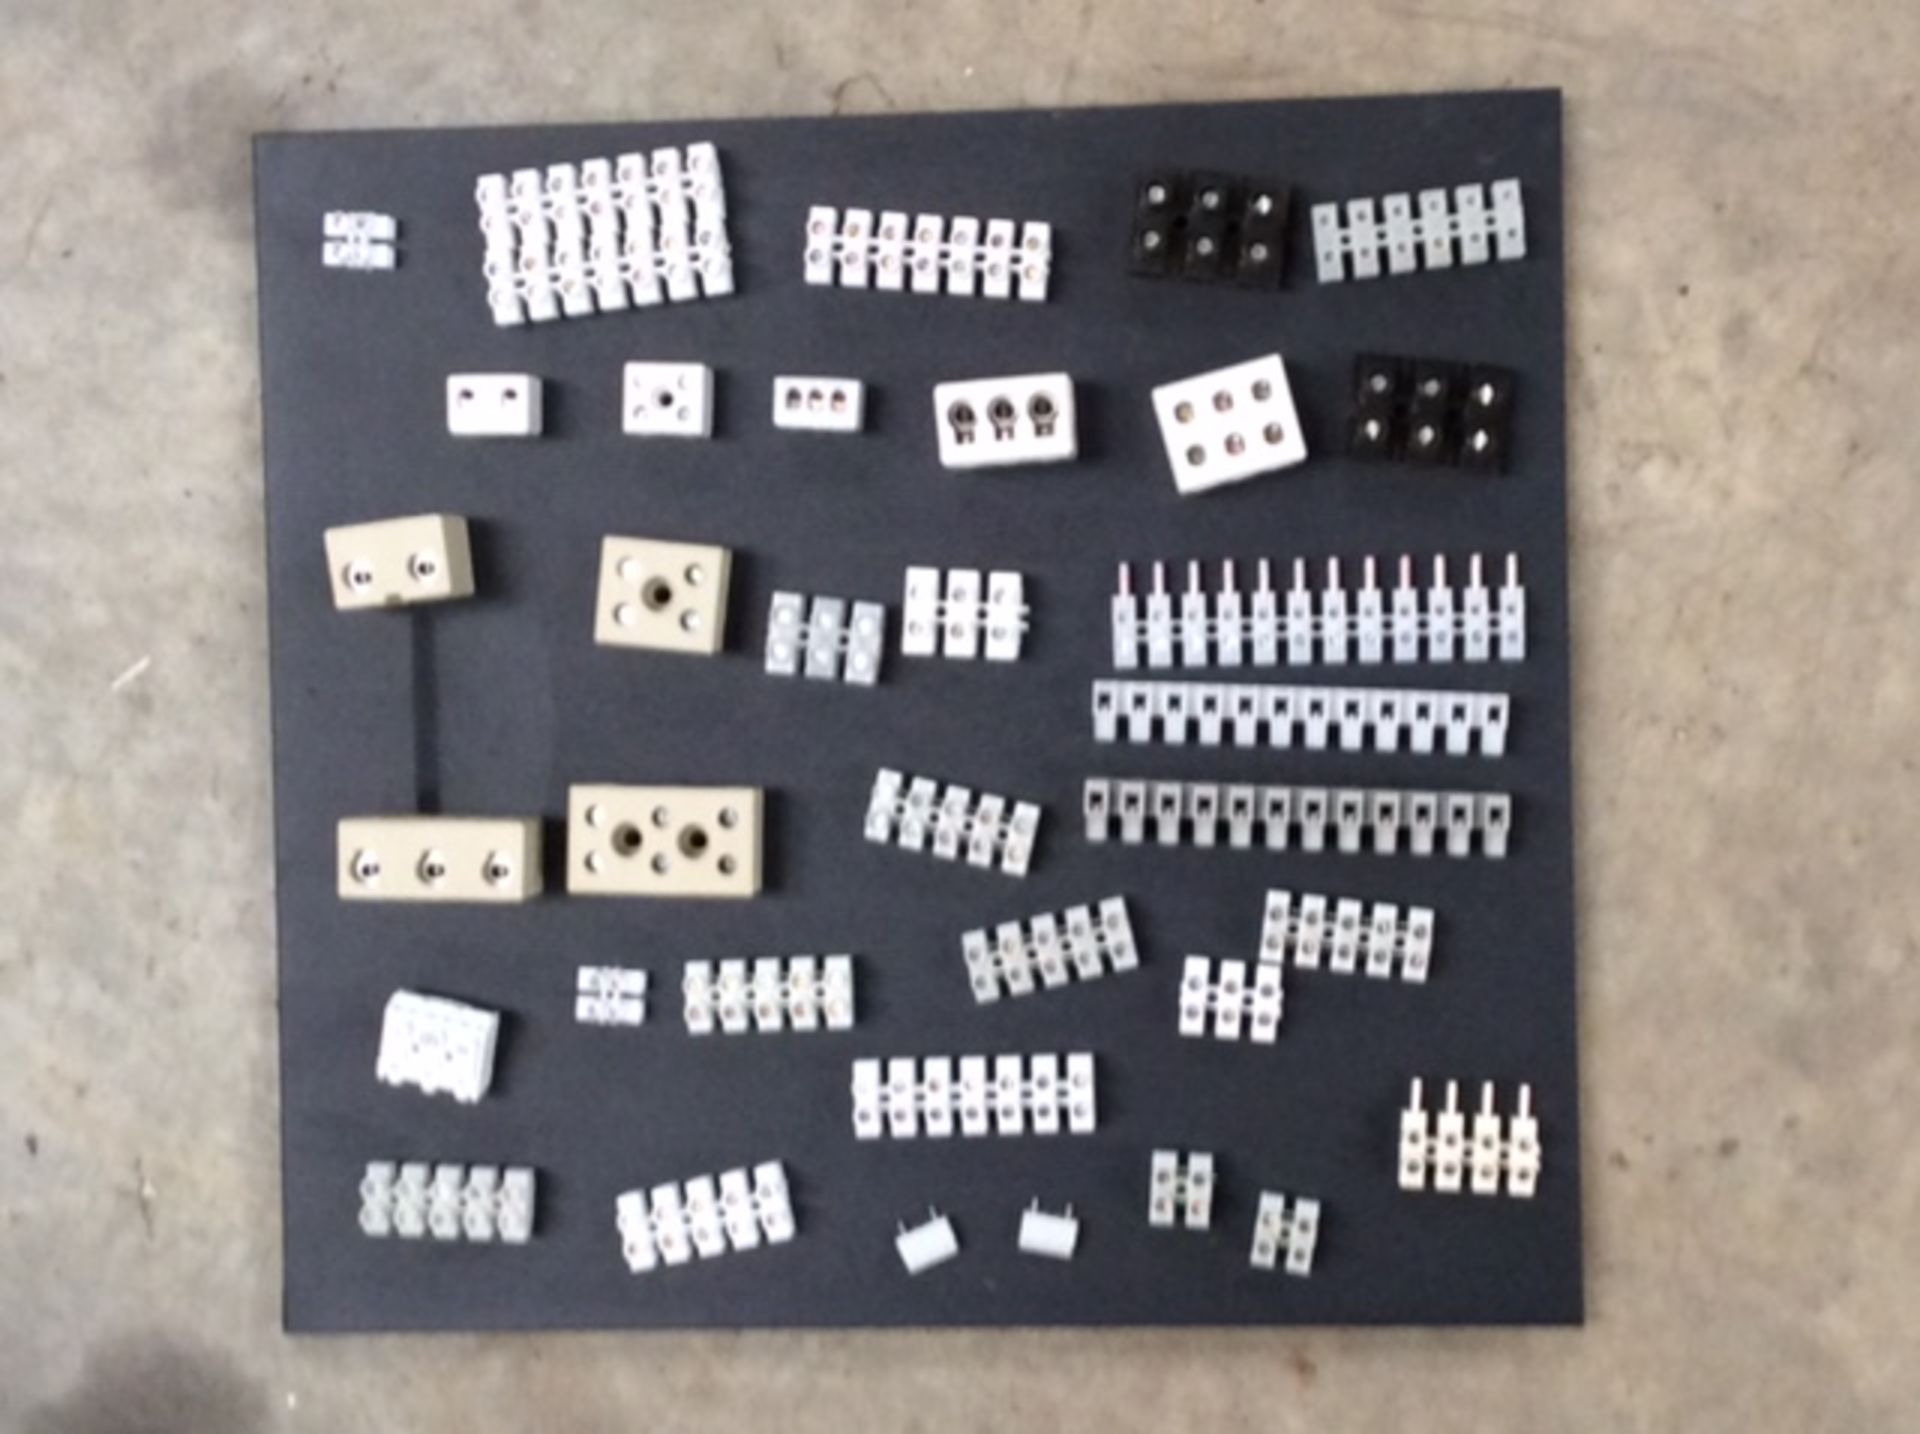 ELECTRICAL CONNECTORS, OVER 100,000 PIECES, PLASTIC & CERAMIC.
 
SAMPLES AS SHOWN 2 – 12 POL. - Image 2 of 2